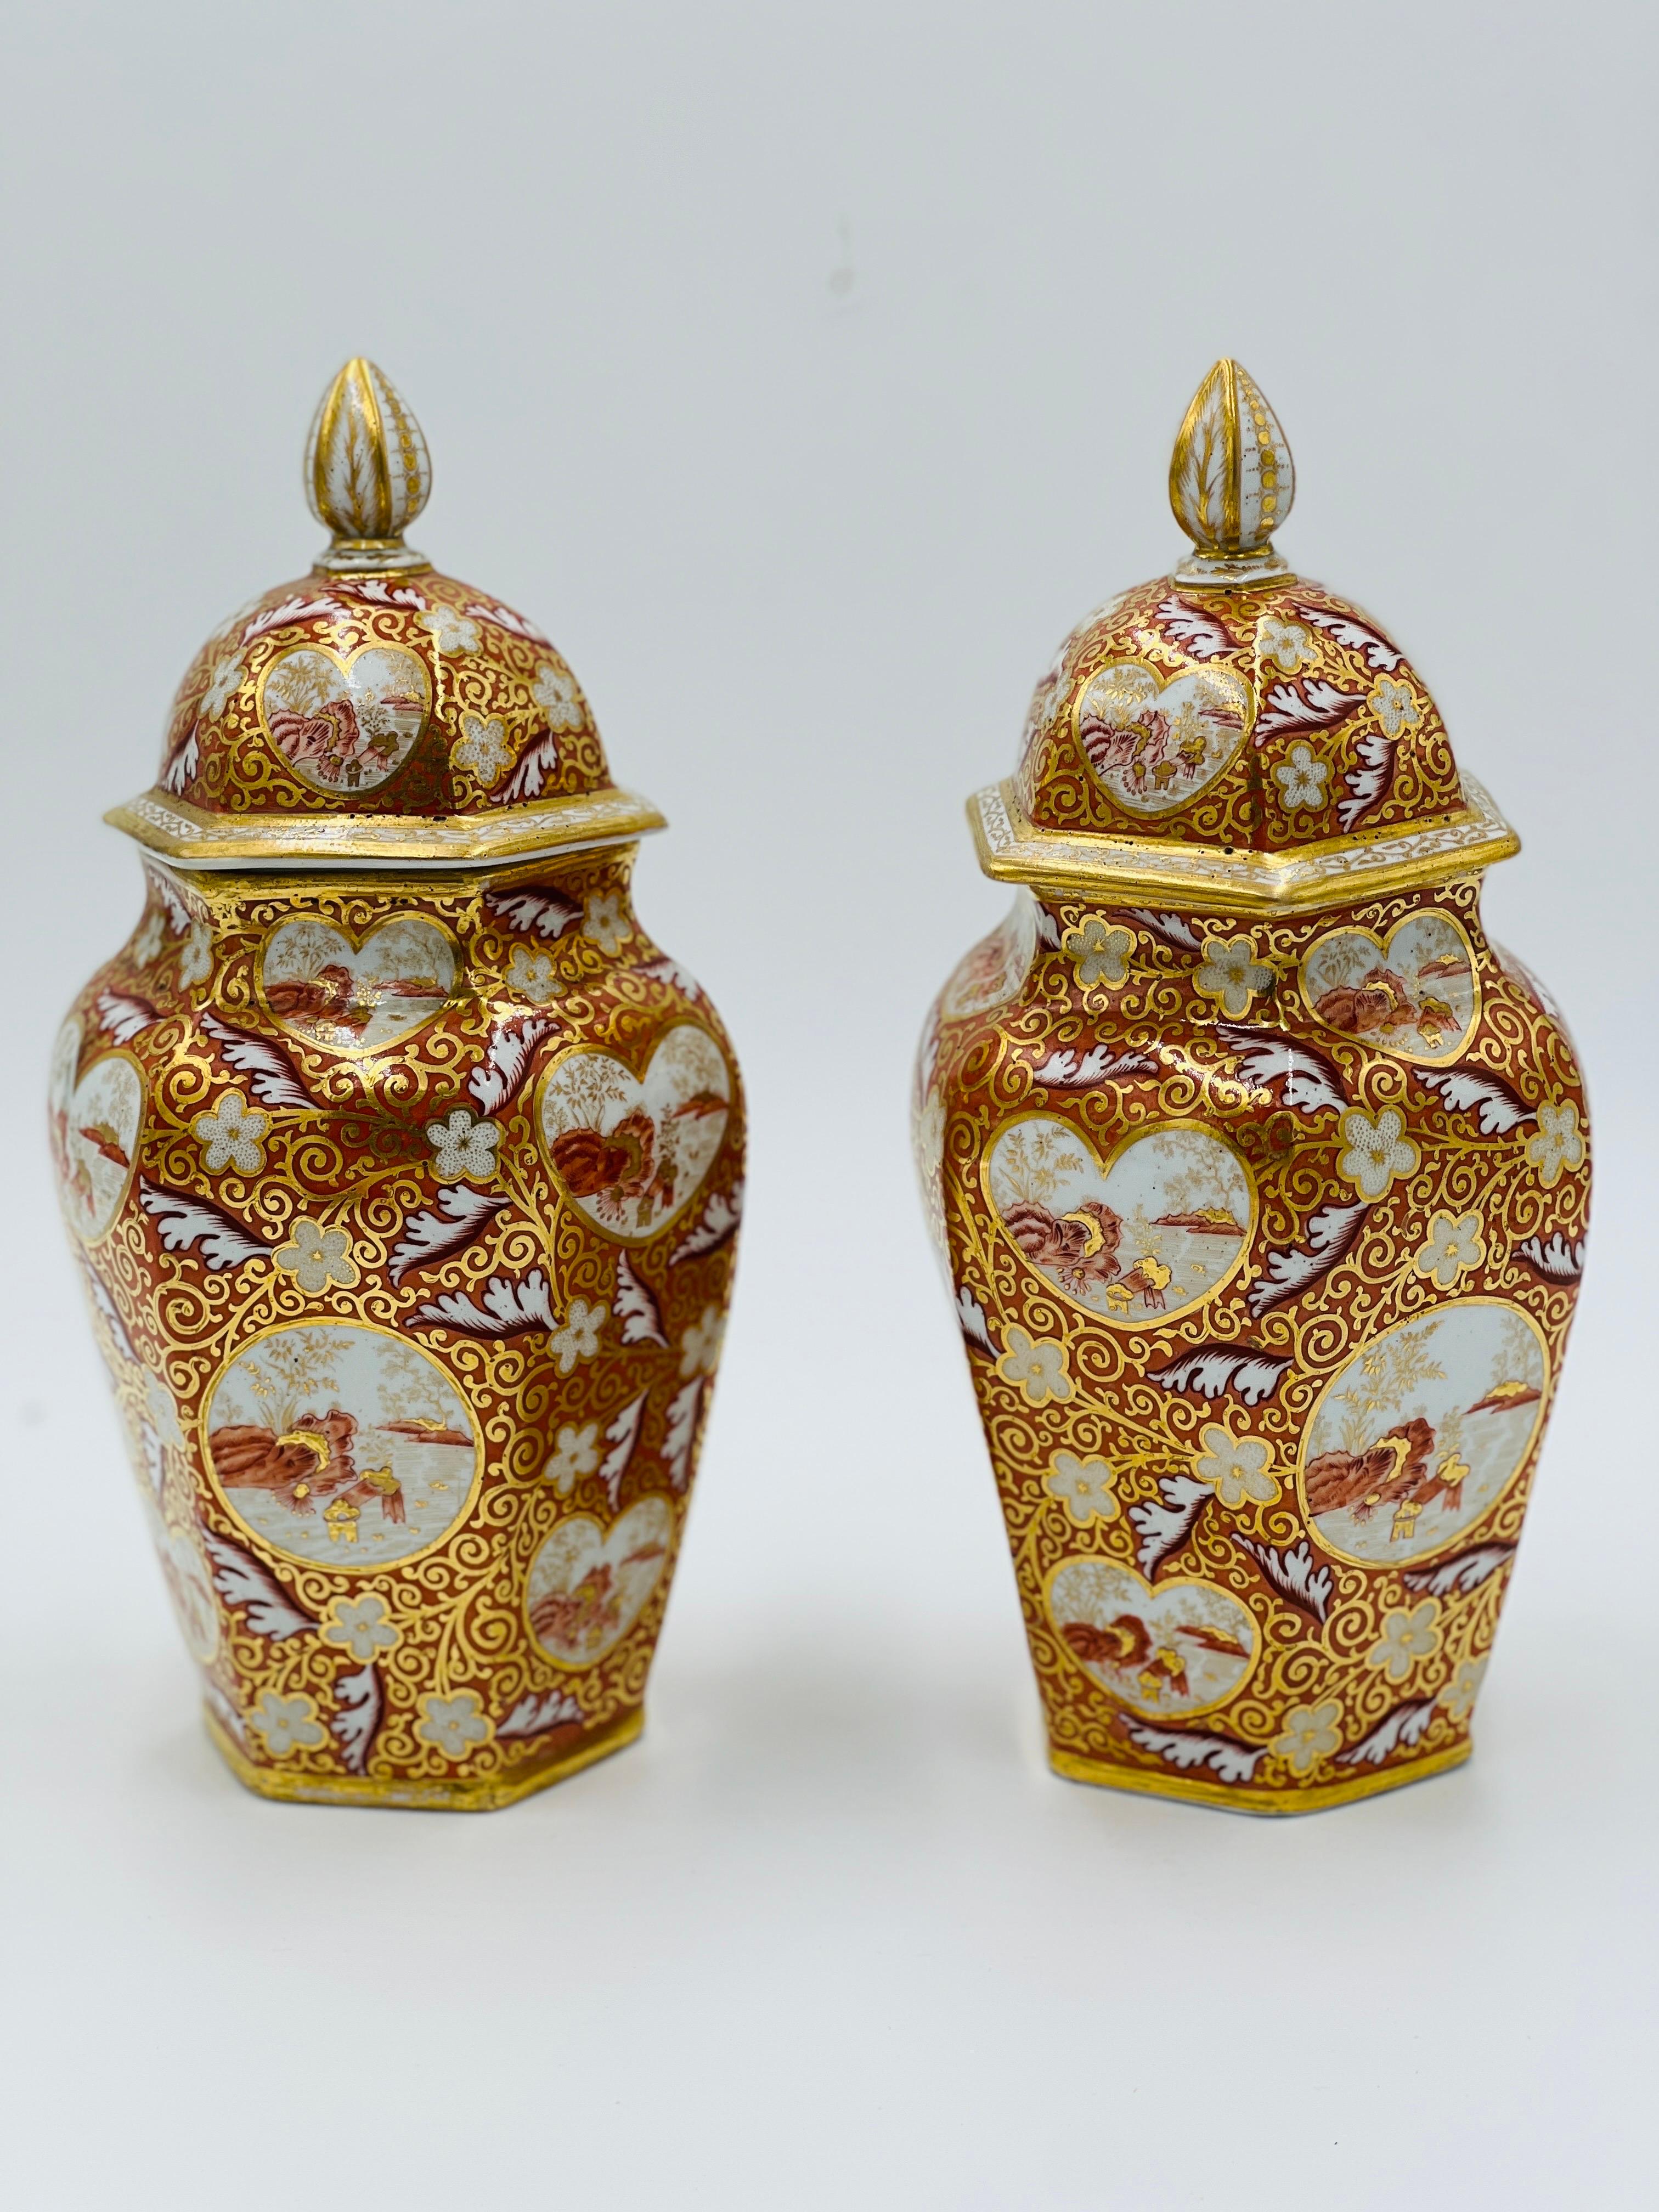 Pair, 19th Century English Japonesque Porcelain Lidded Urns Exc 10.25” For Sale 3